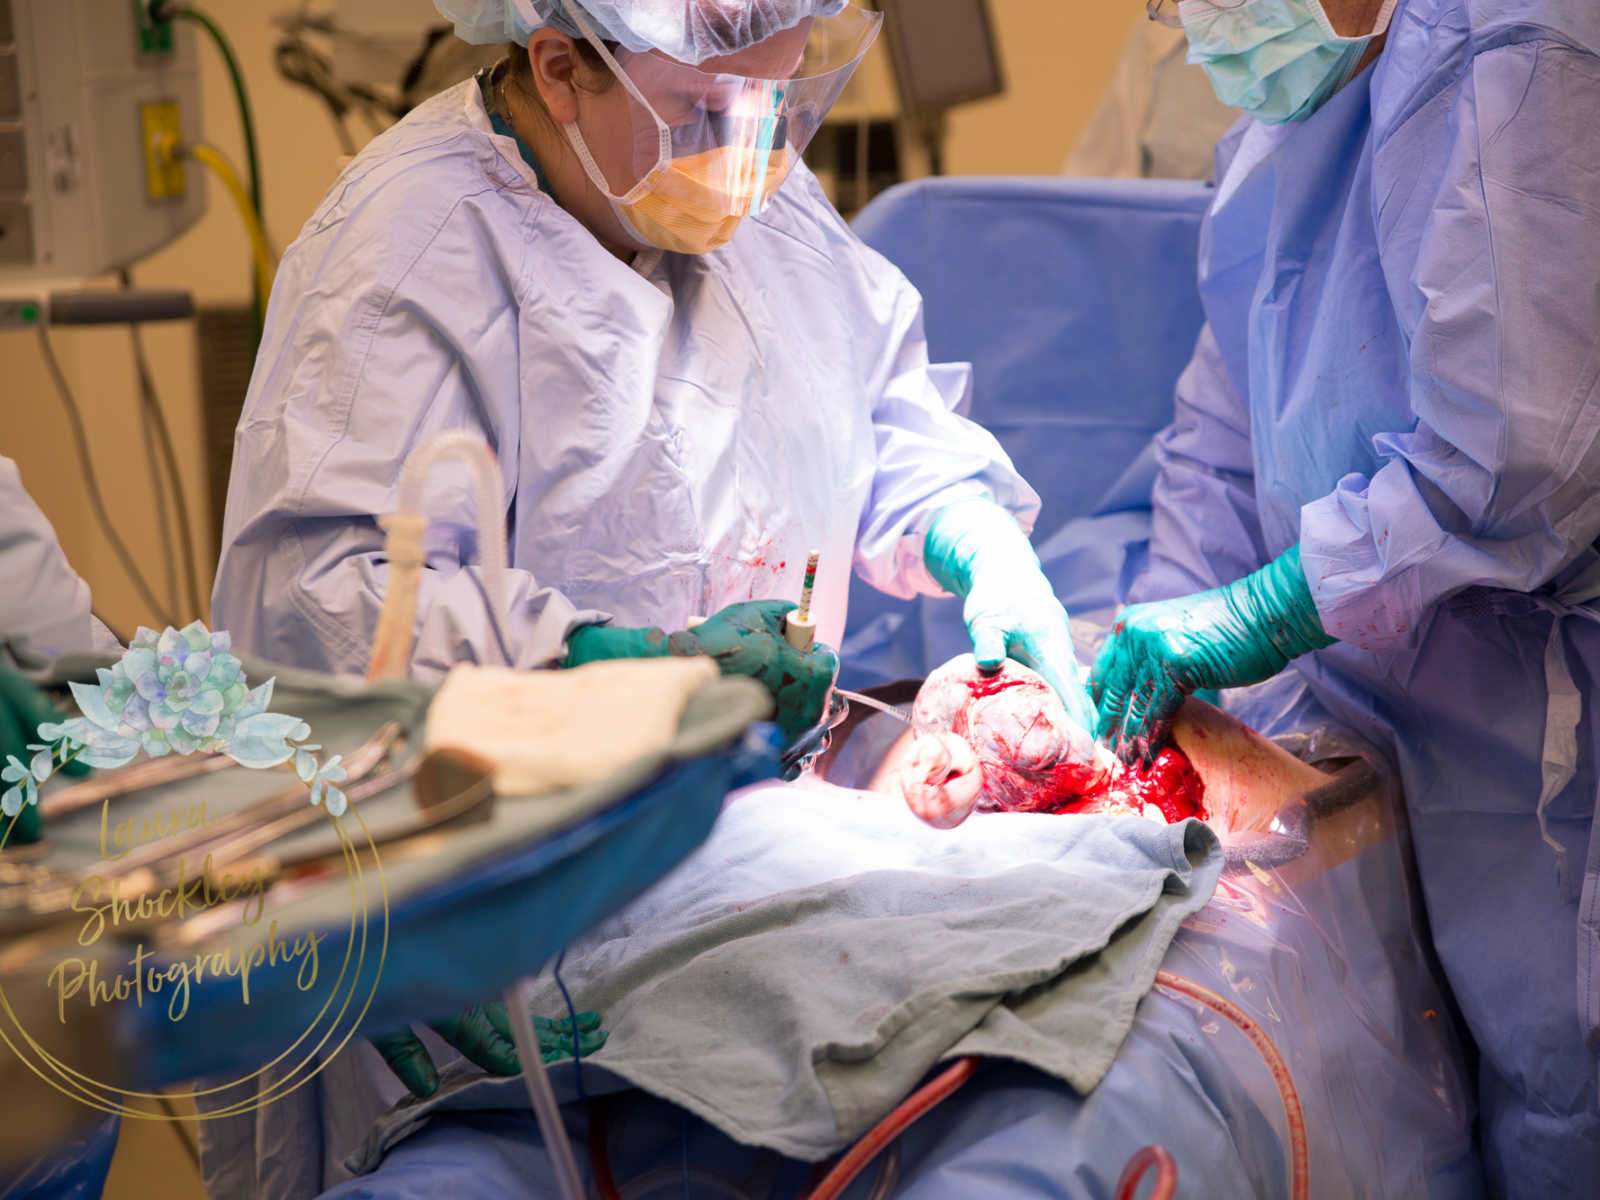 Doctors pull baby's head out during c-section